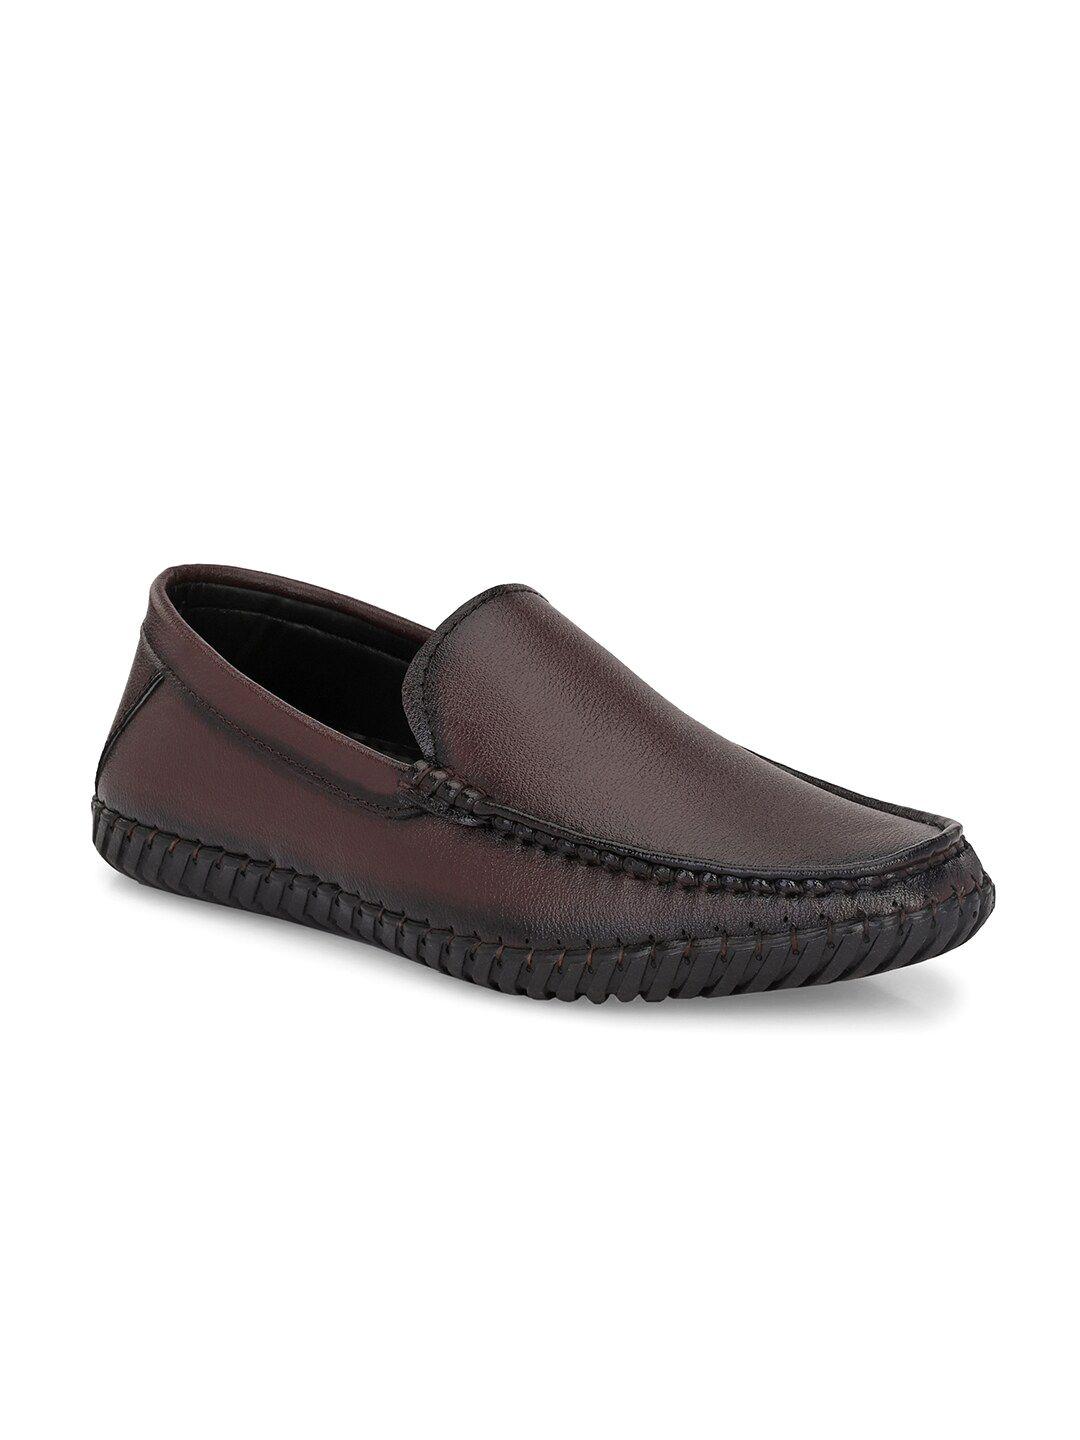 HERE&NOW Men Brown Textured Round Toe Loafers